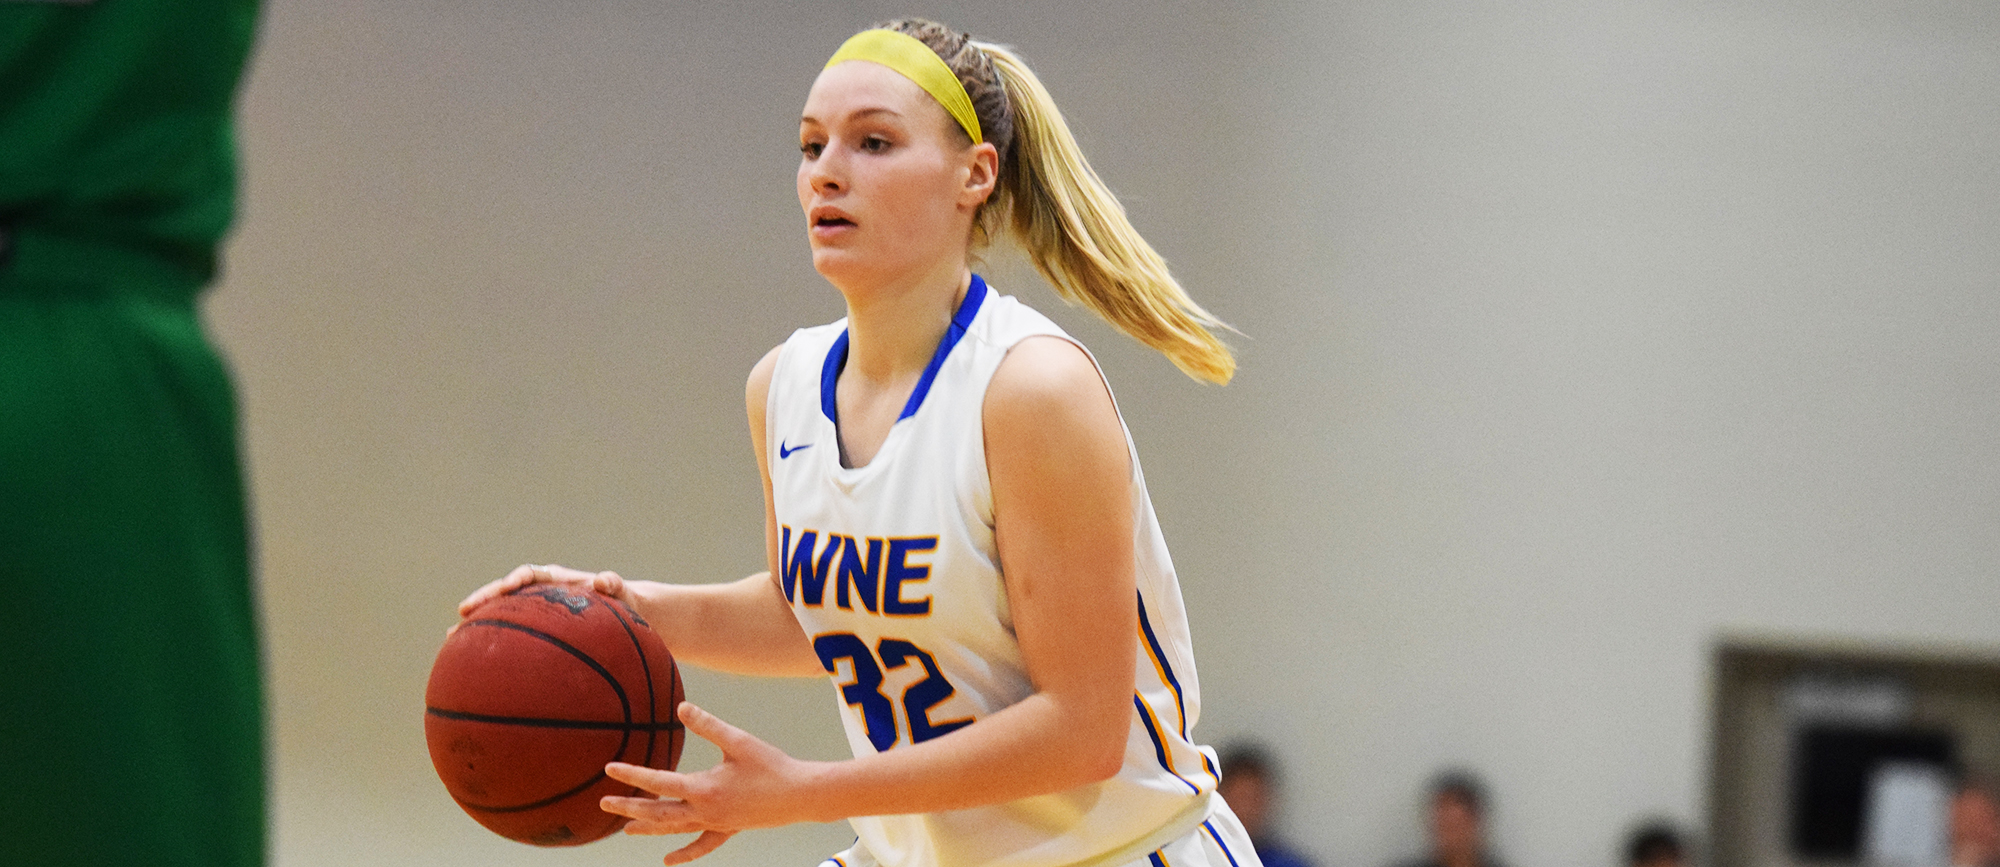 Junior Courtney Carlson scored a career-high 21 points in Western New England's 52-48 loss to Endicott on Wednesday night. (Photo by Rachael Margossian)